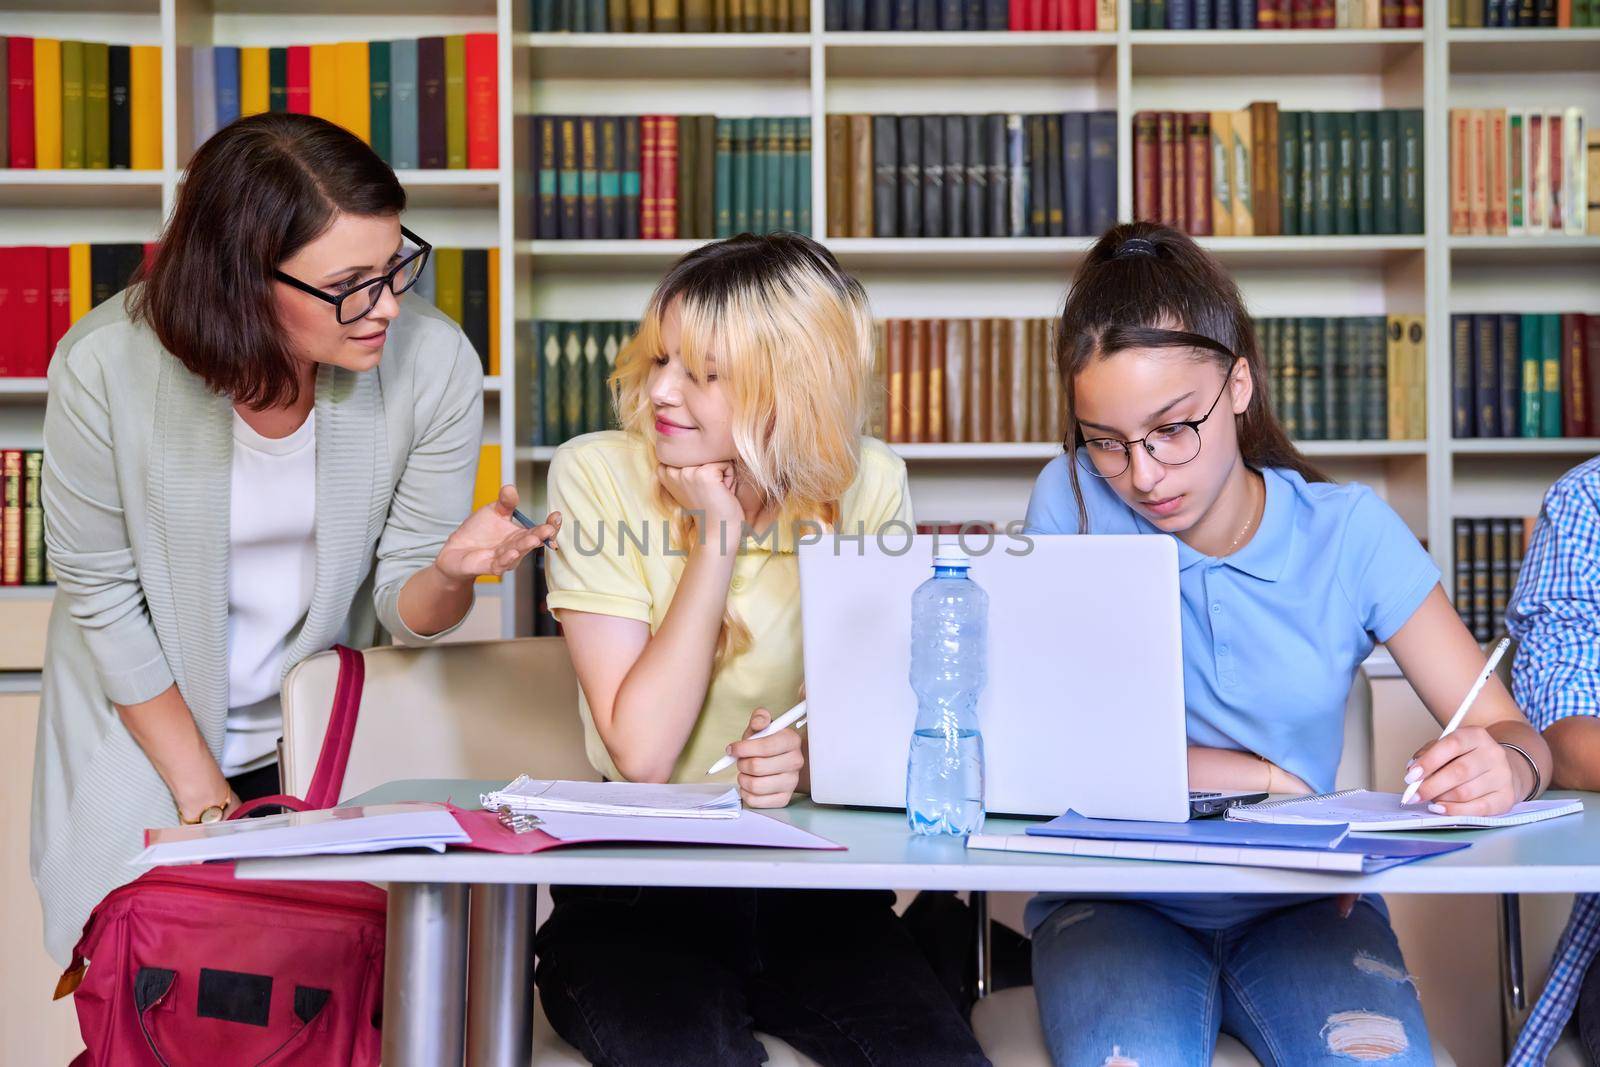 Girls teenage students studying in library with female teacher mentor. High school, education, adolescent, back to school, back to college concept